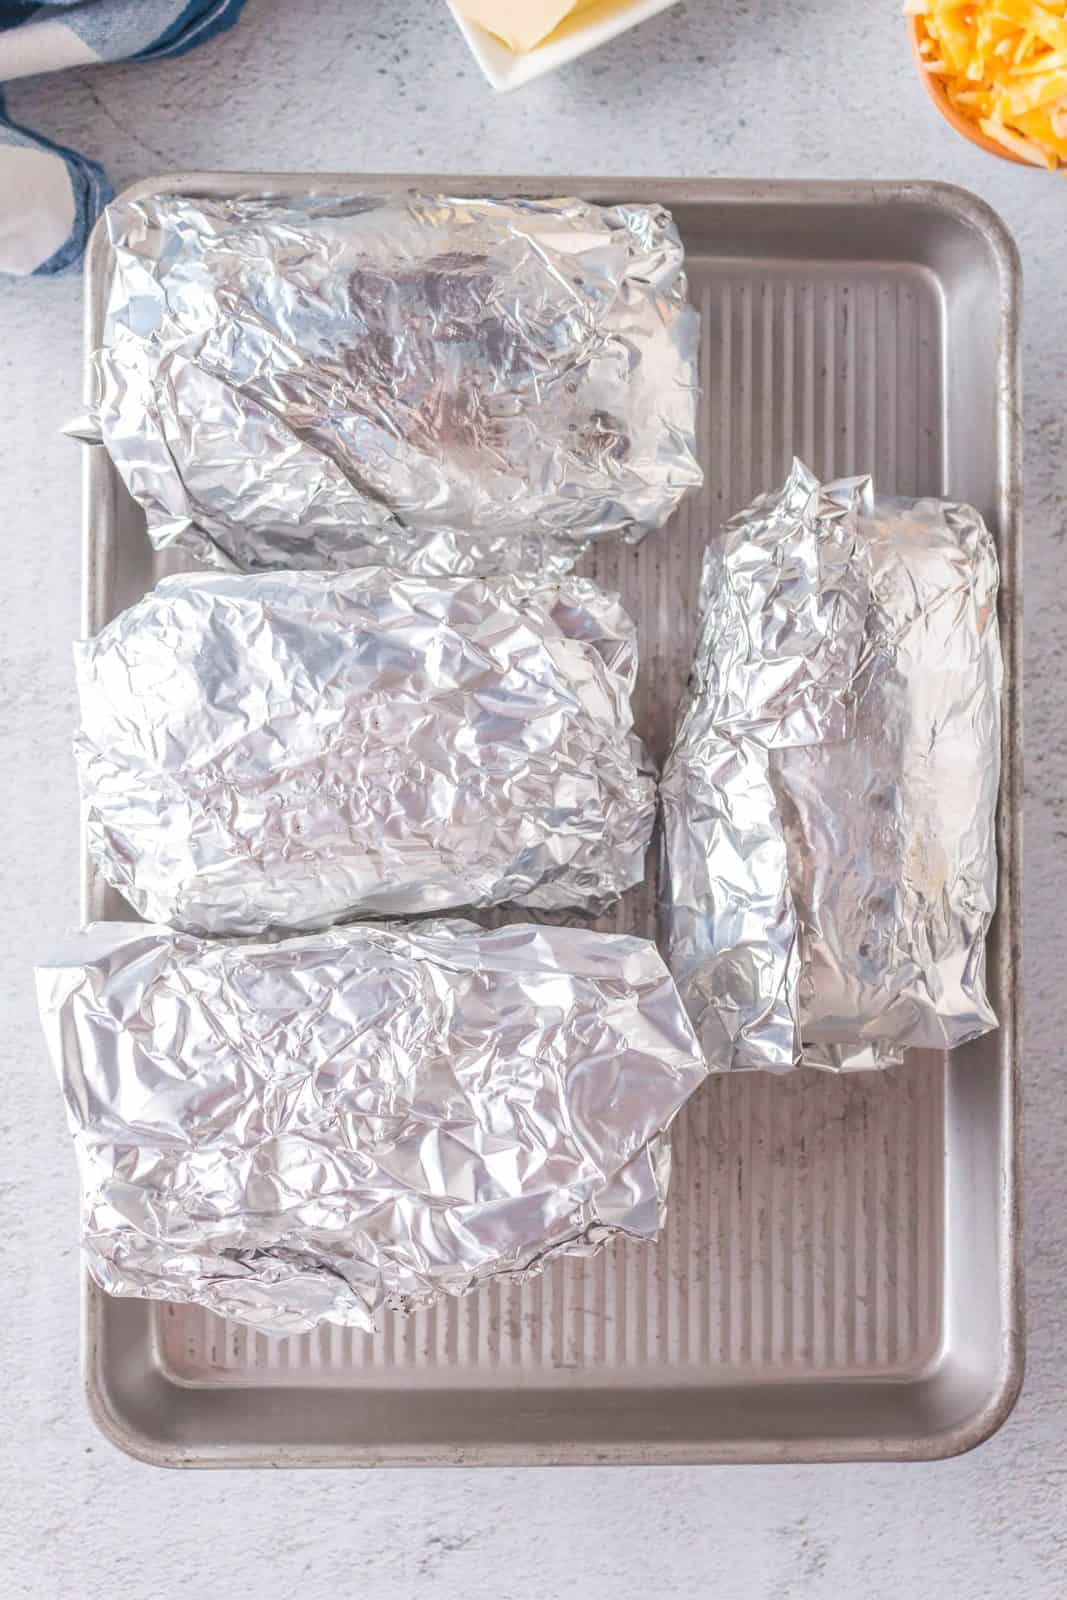 Potatoes wrapped in foil on baking sheet.